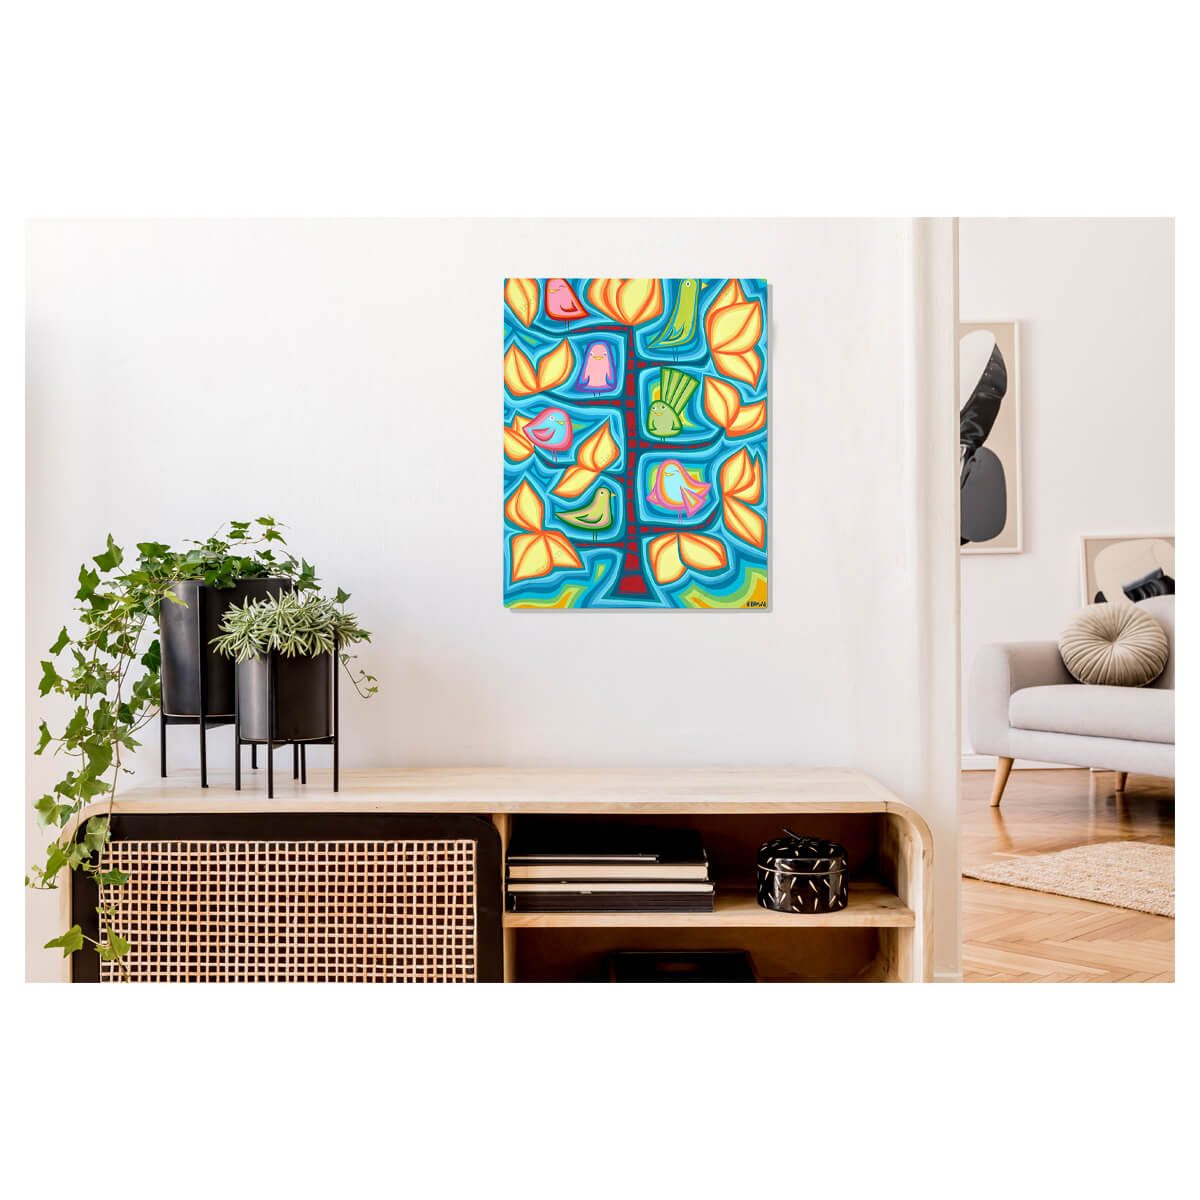 A metal art print featuring friendly birds hanging out together in a colorful tree by Hawaii surf artist Heather Brown